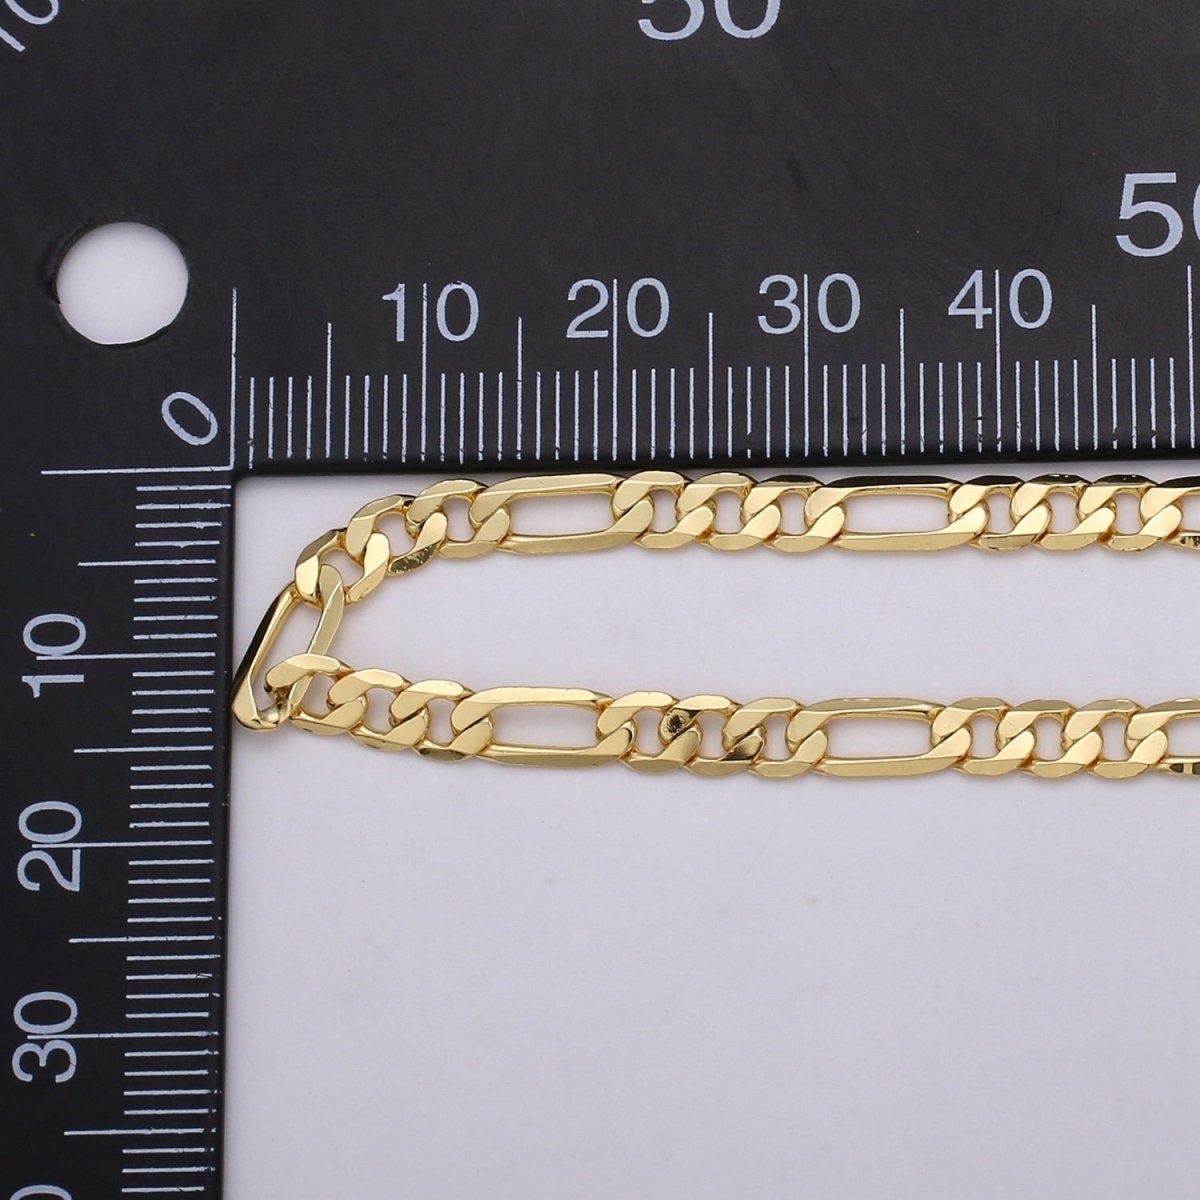 4.5mm FIGARO Chain, 16K Gold Filled Figaro Chain Flat Figaro Chain Jewelry Chain Sold by the Yard for Necklace Bracelet Anklet Supply | ROLL-377 - DLUXCA